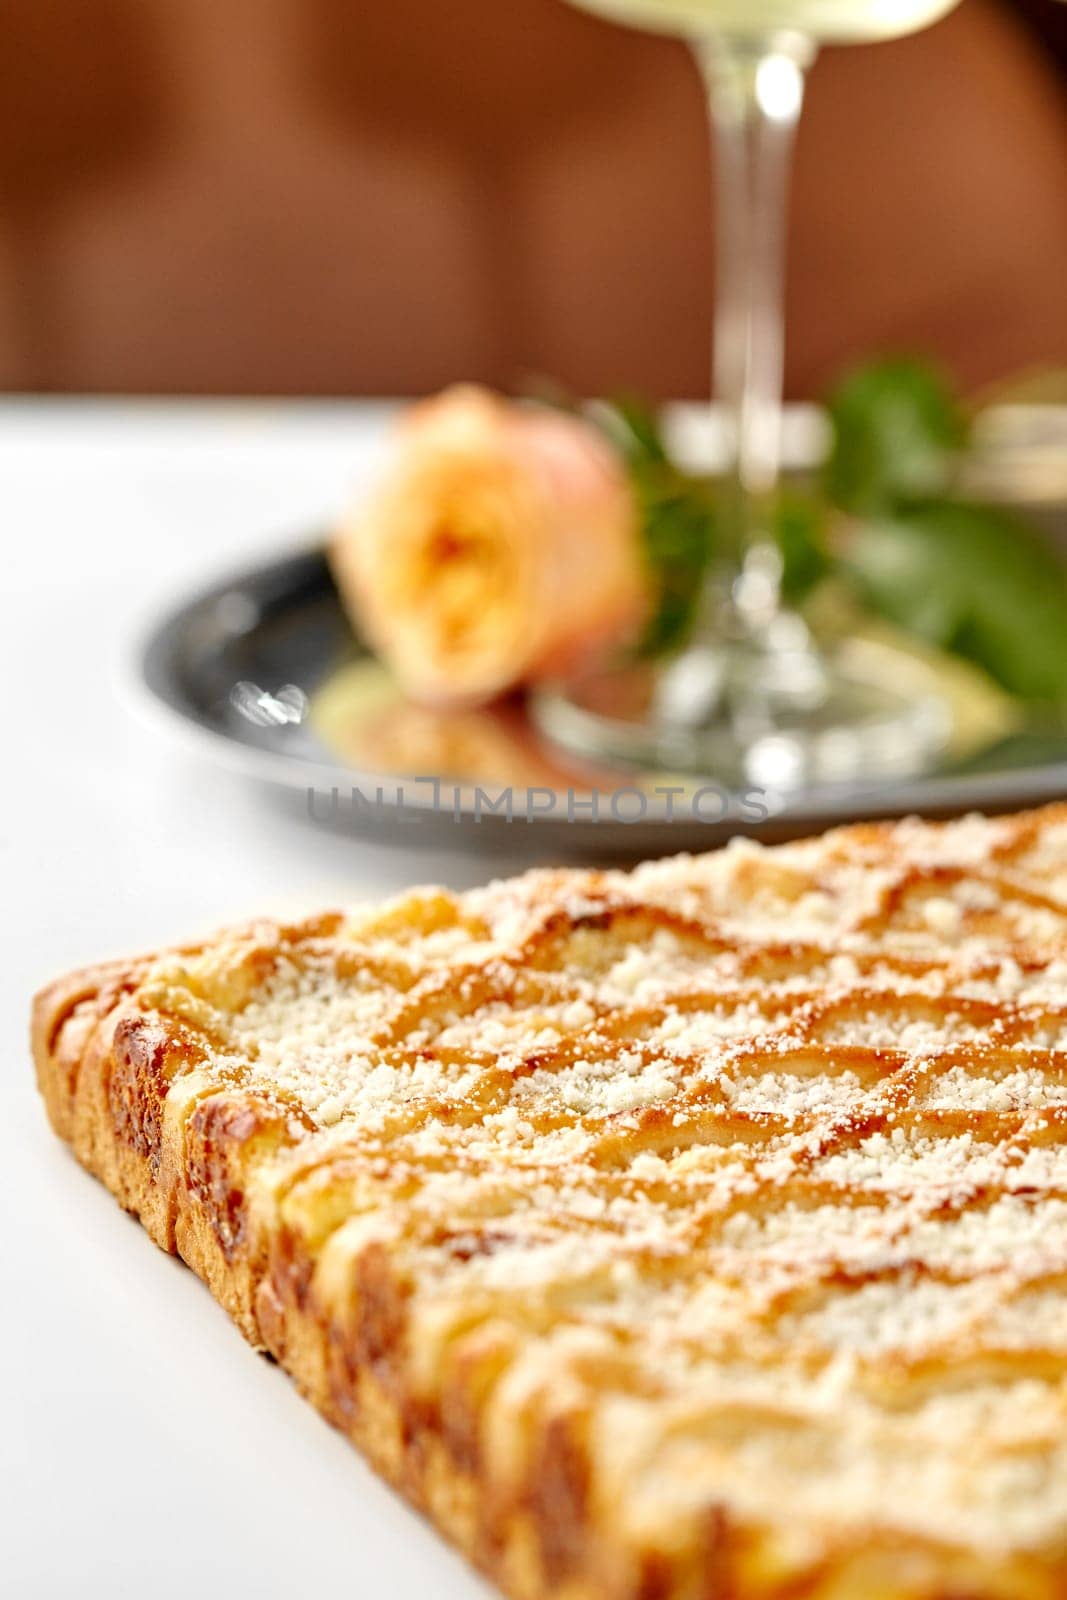 Selective focus on delicious golden lattice cheese galette topped with parmesan crumbs served on table in romantic setting with glass of wine and fresh rose on blurred background